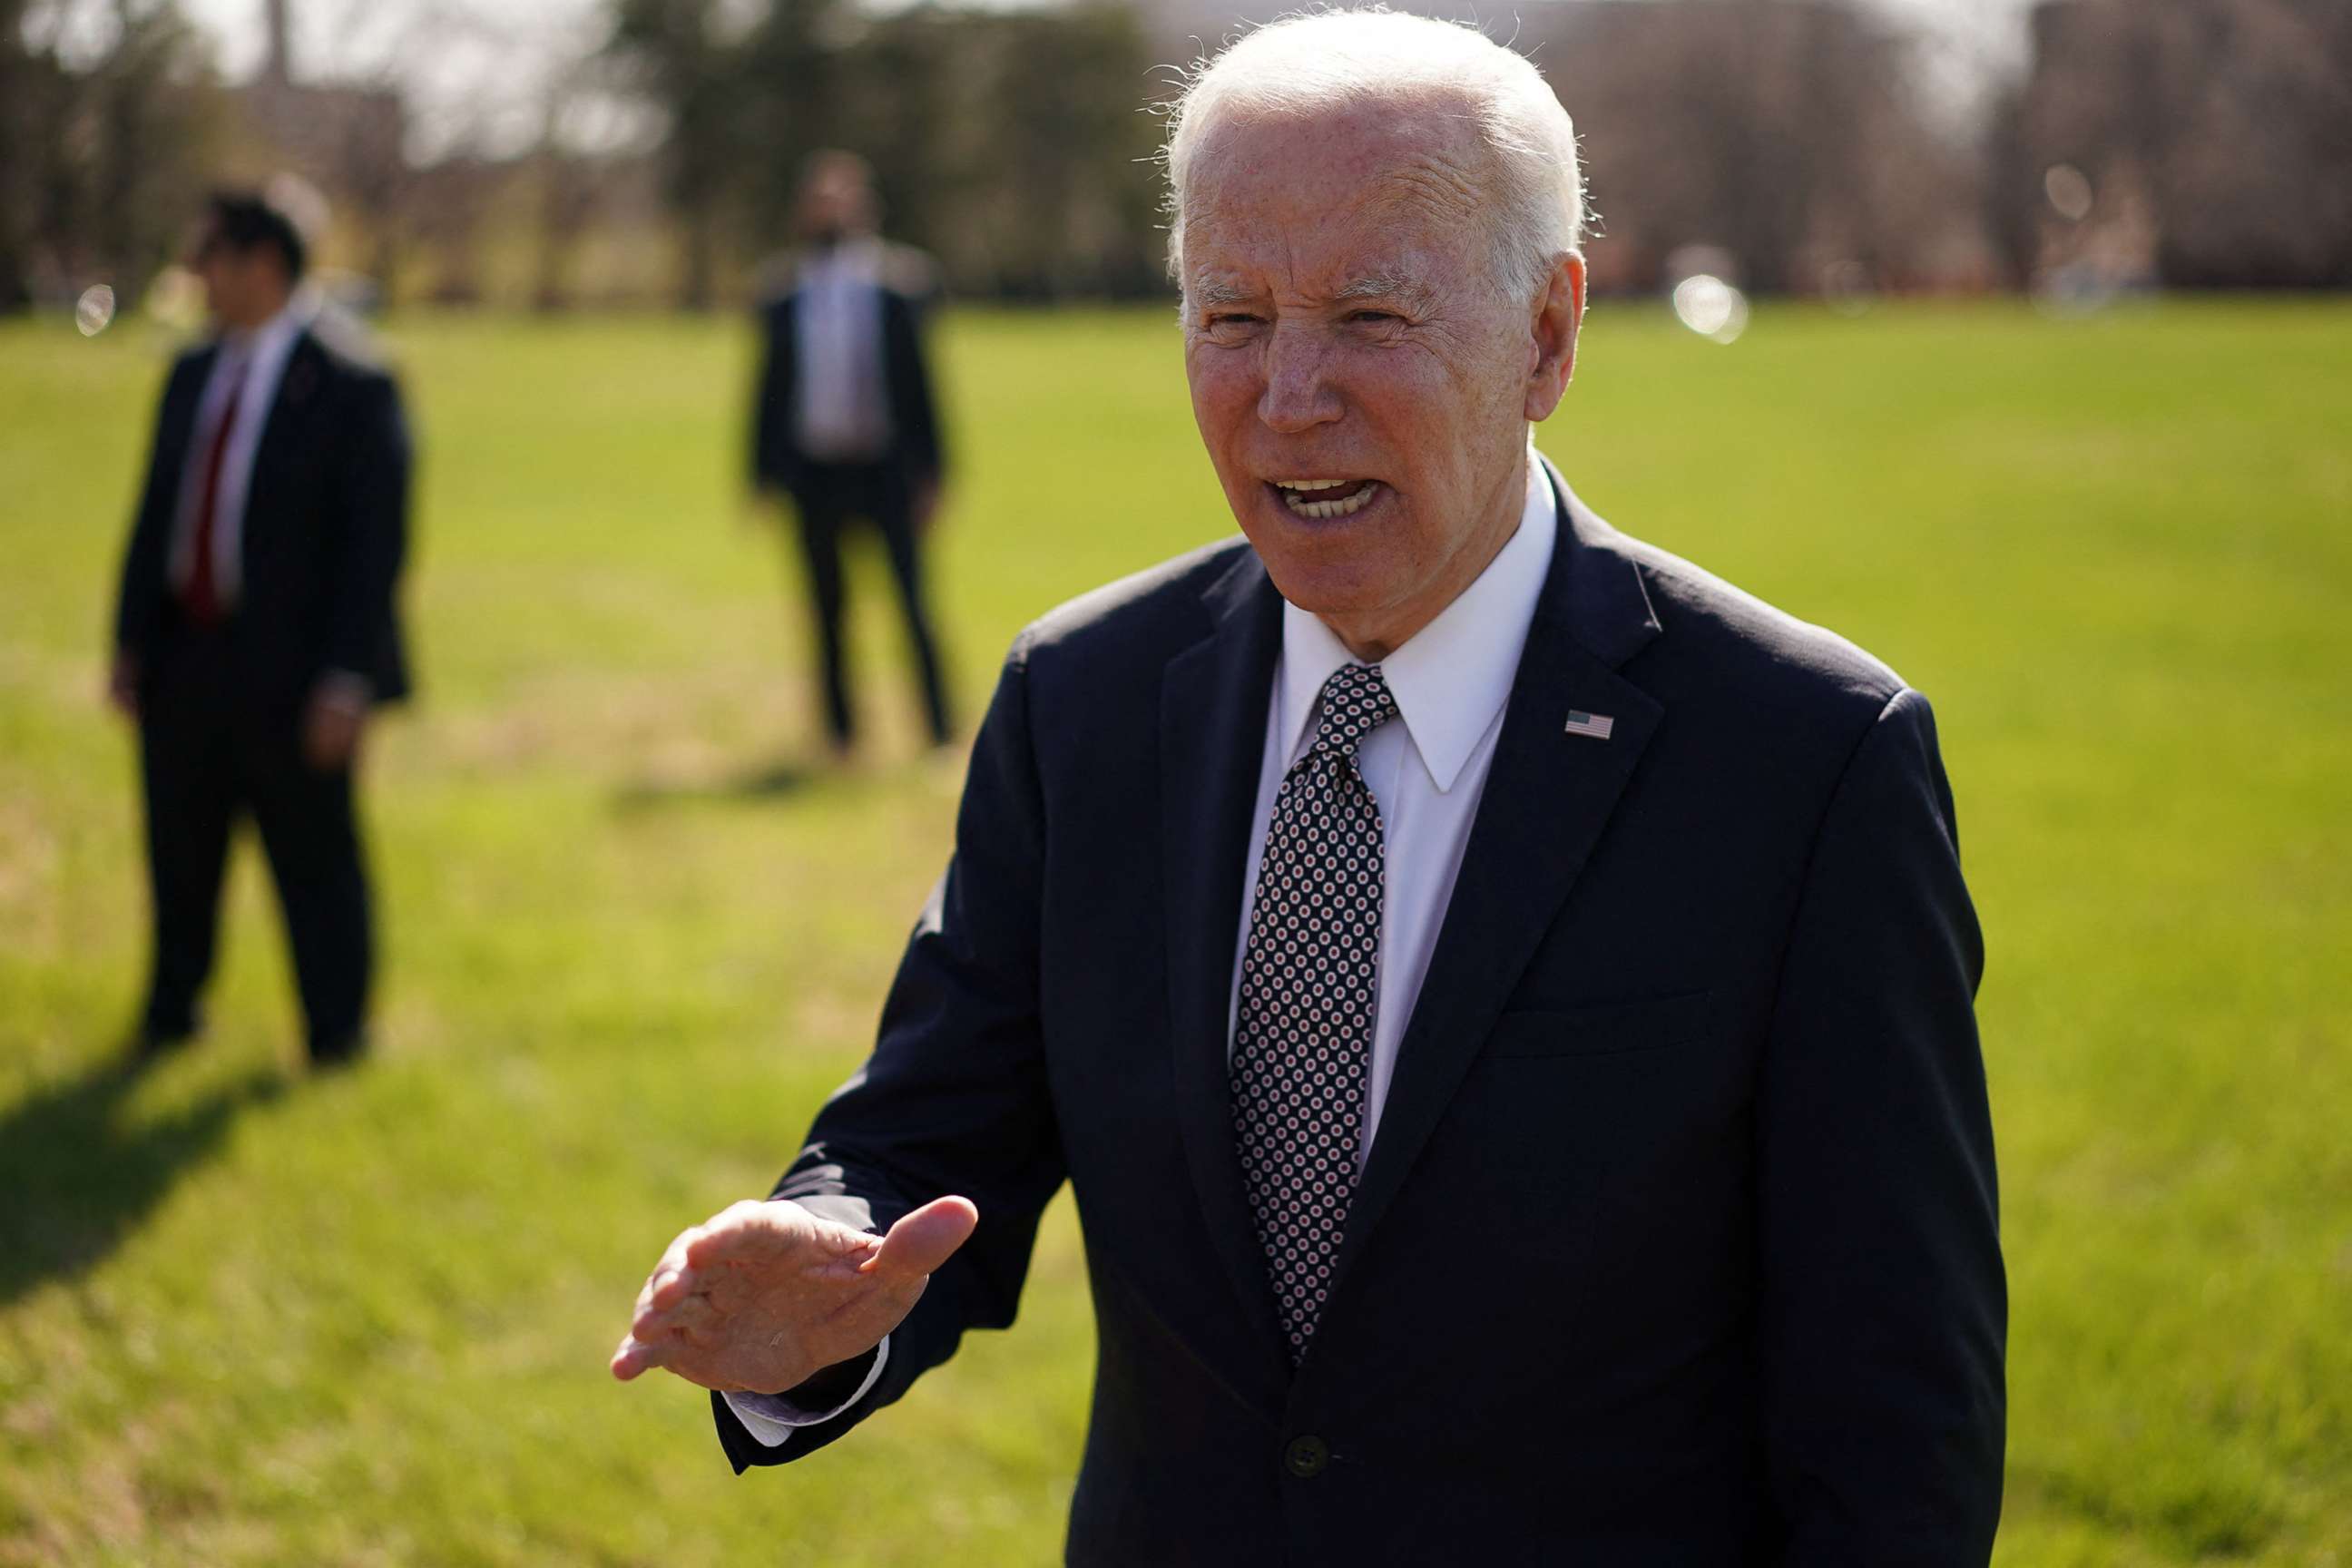 PHOTO: President Joe Biden speaks to reporters upon arrival at Fort McNair in Washington, D.C., April 4, 2022.